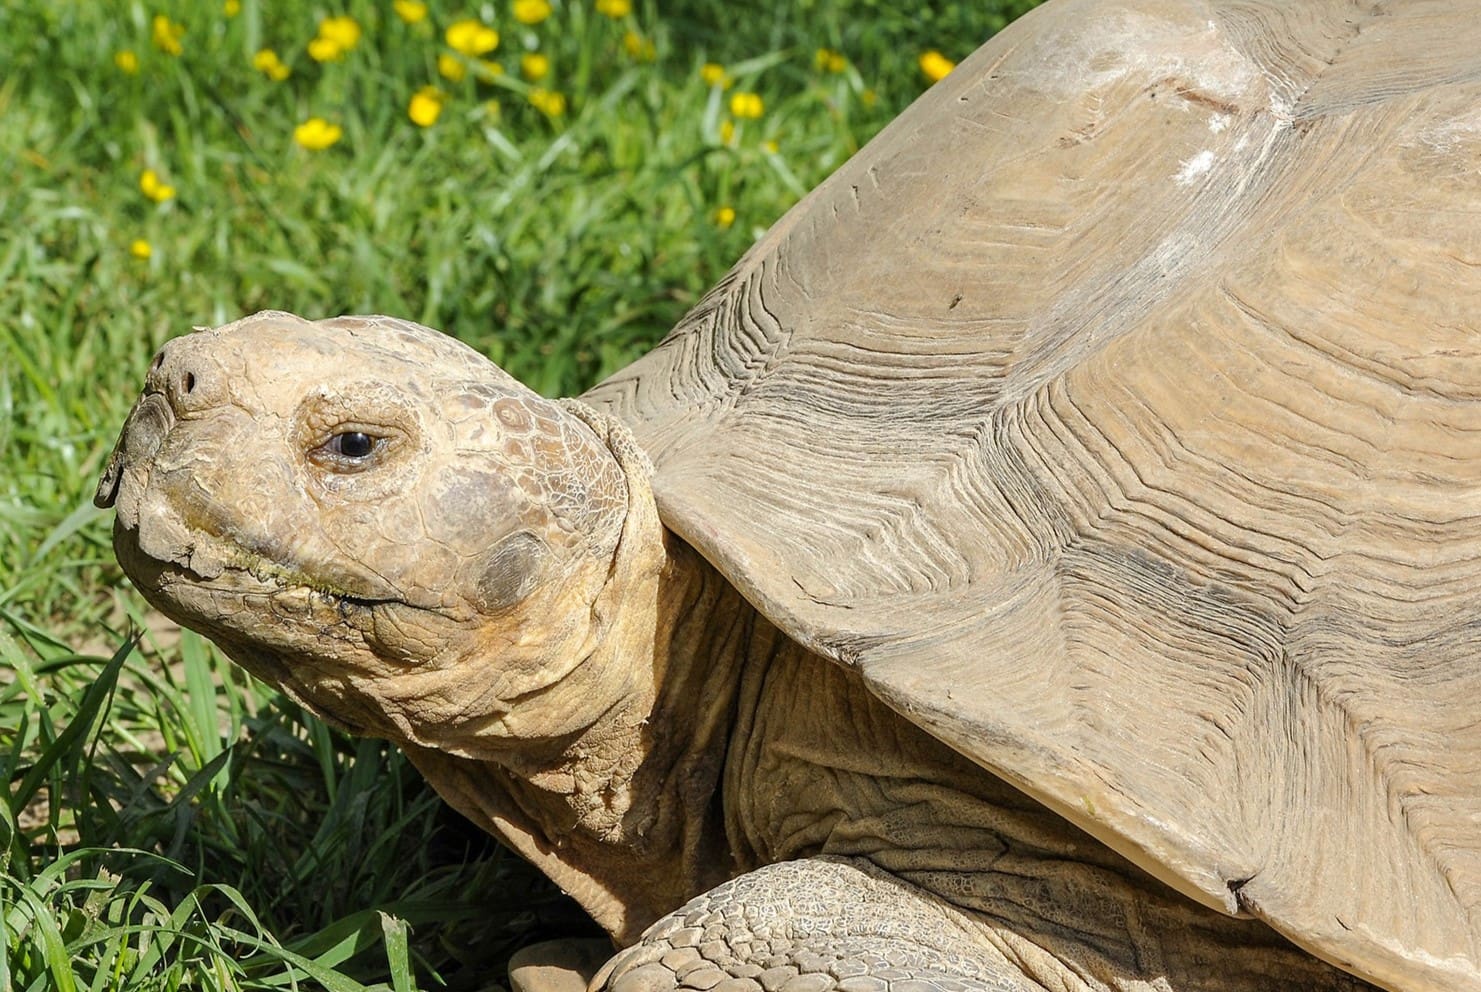 What Kind Of Grass Can Sulcata Tortoises Eat